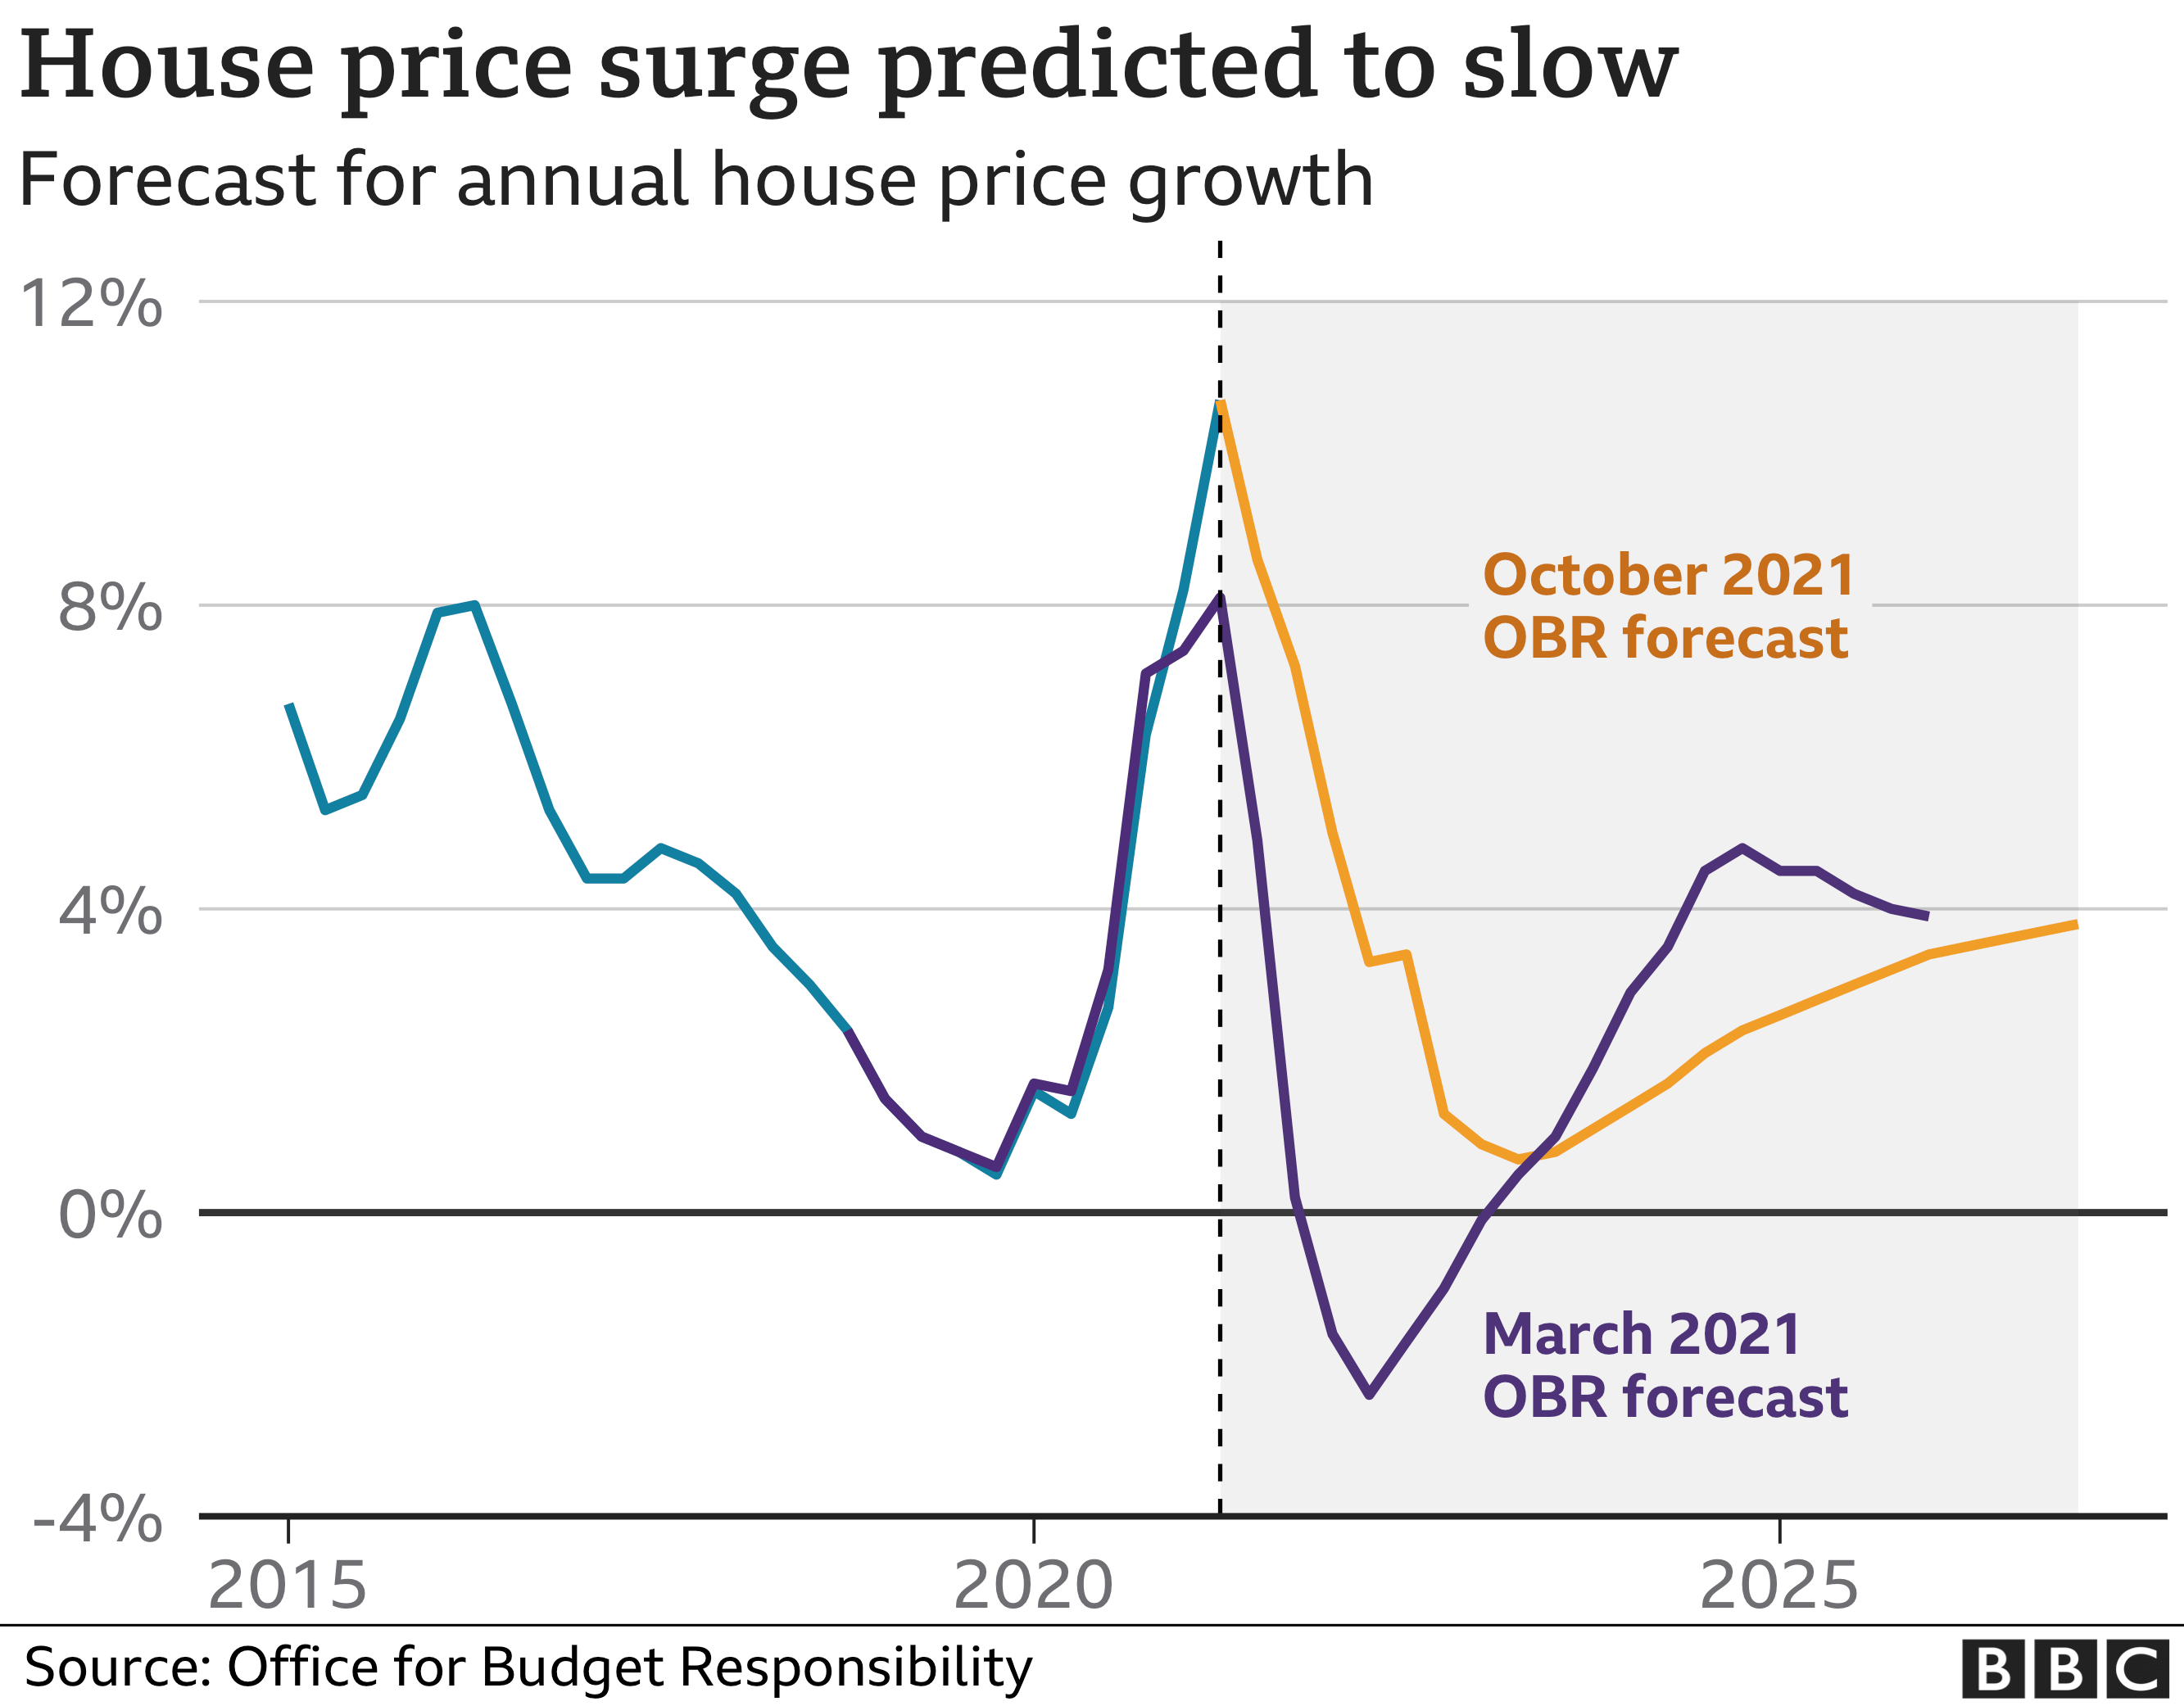 Chart showing house price surge is predicted to slow